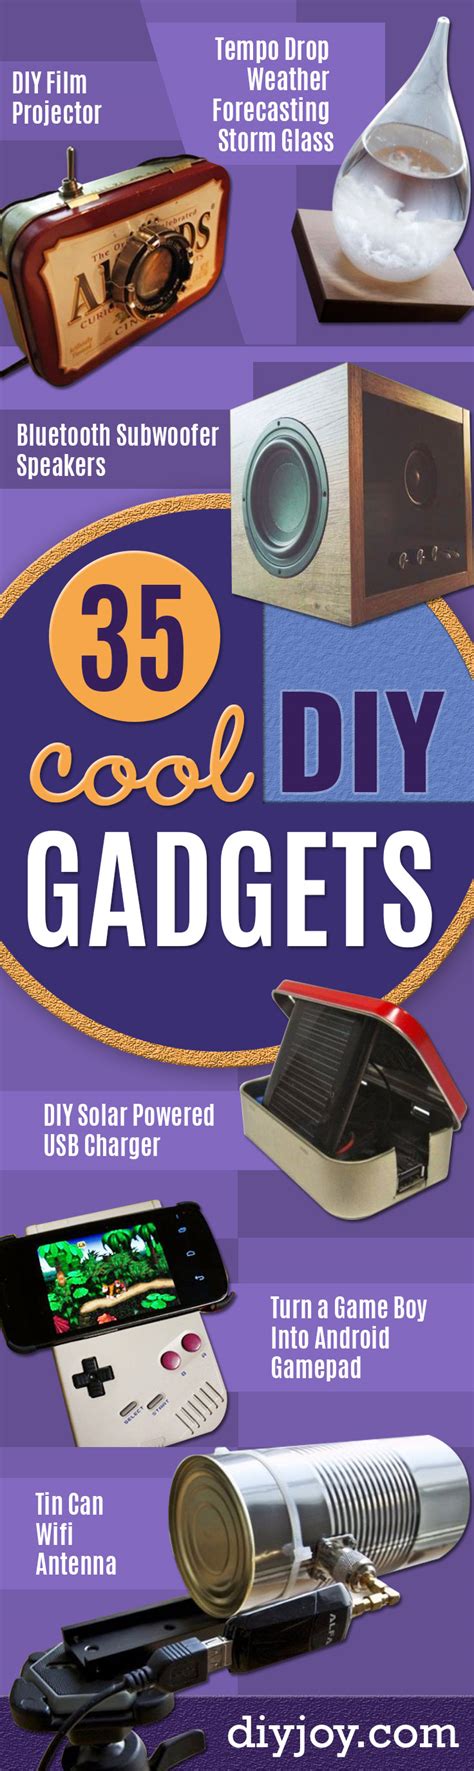 35 Cool Diy Gadgets You Can Make To Impress Your Friends